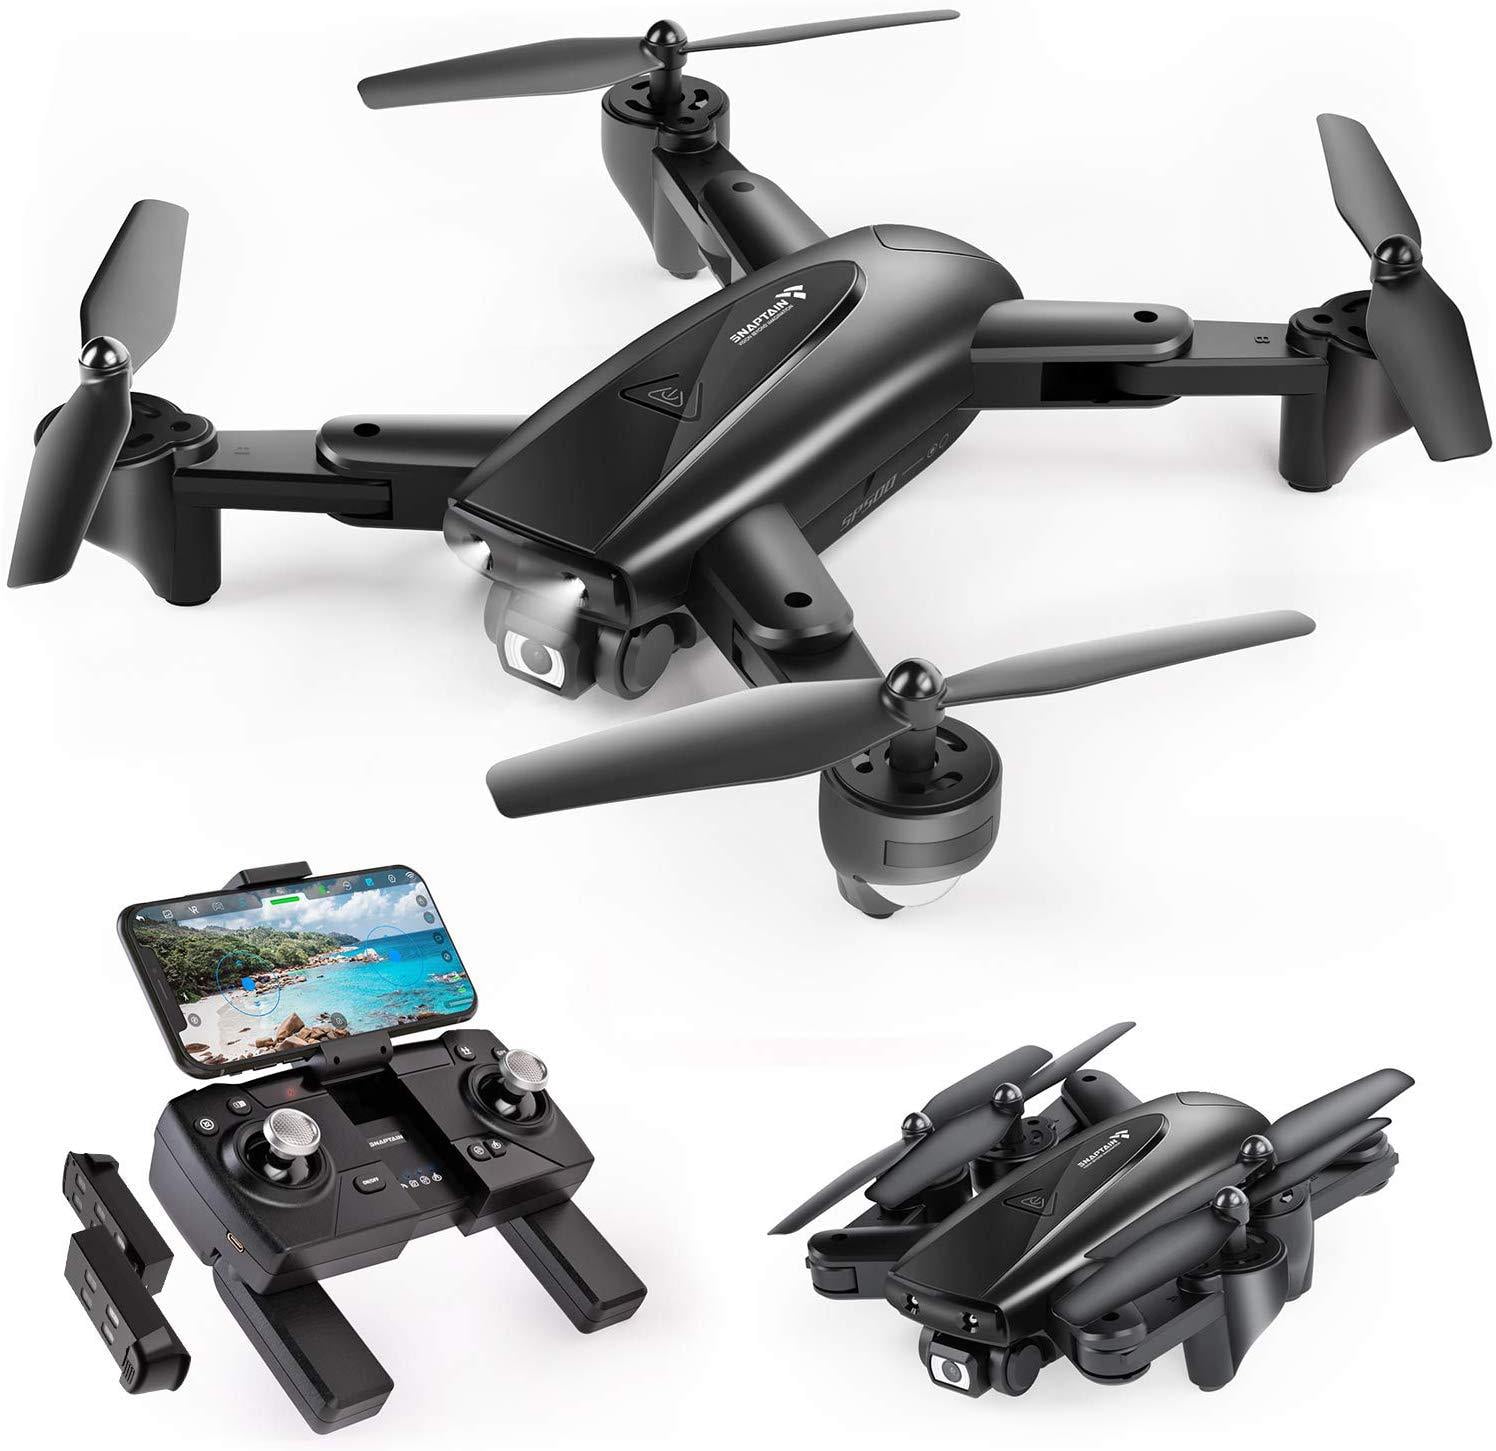 SNAPTAIN SP510 Foldable GPS FPV Drone with 2.7K Camera for Adults UHD Live Video 